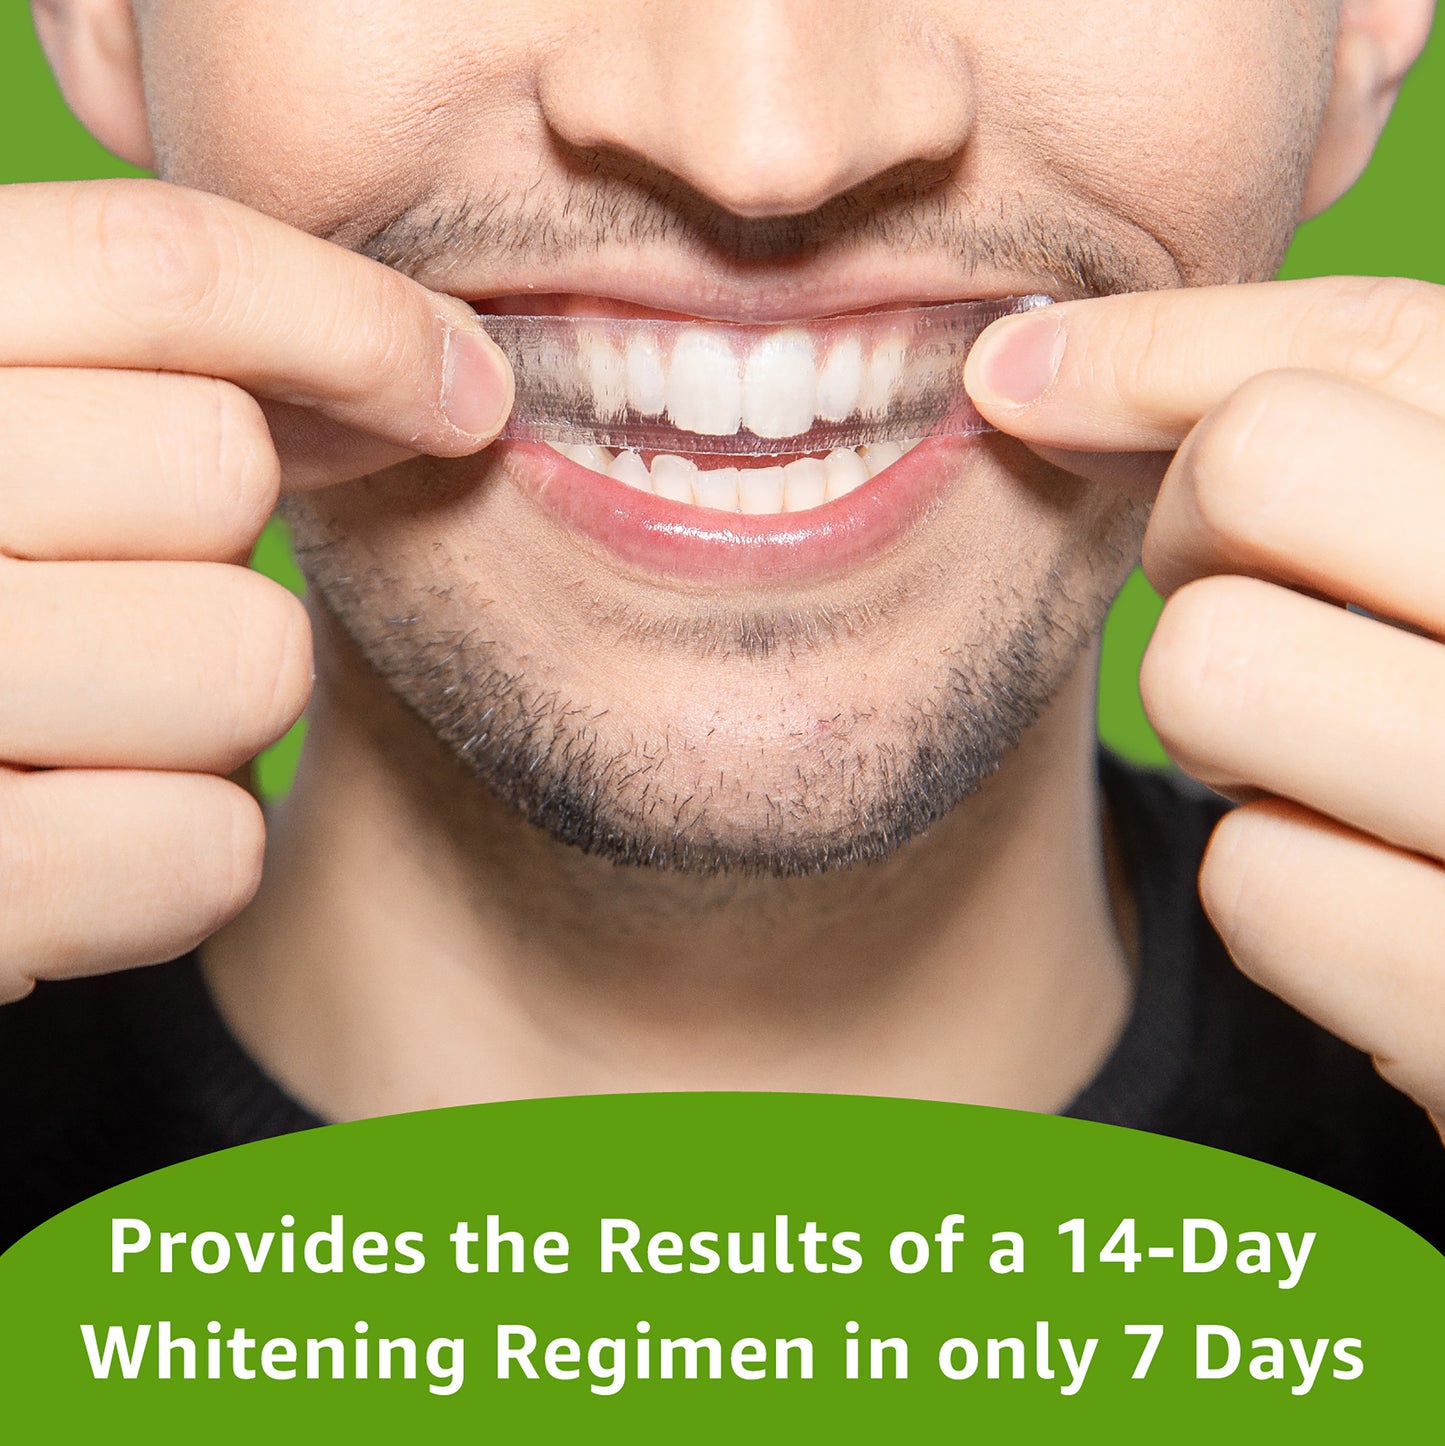 Provides the results of a 14-day whitening regimen in only 7 days